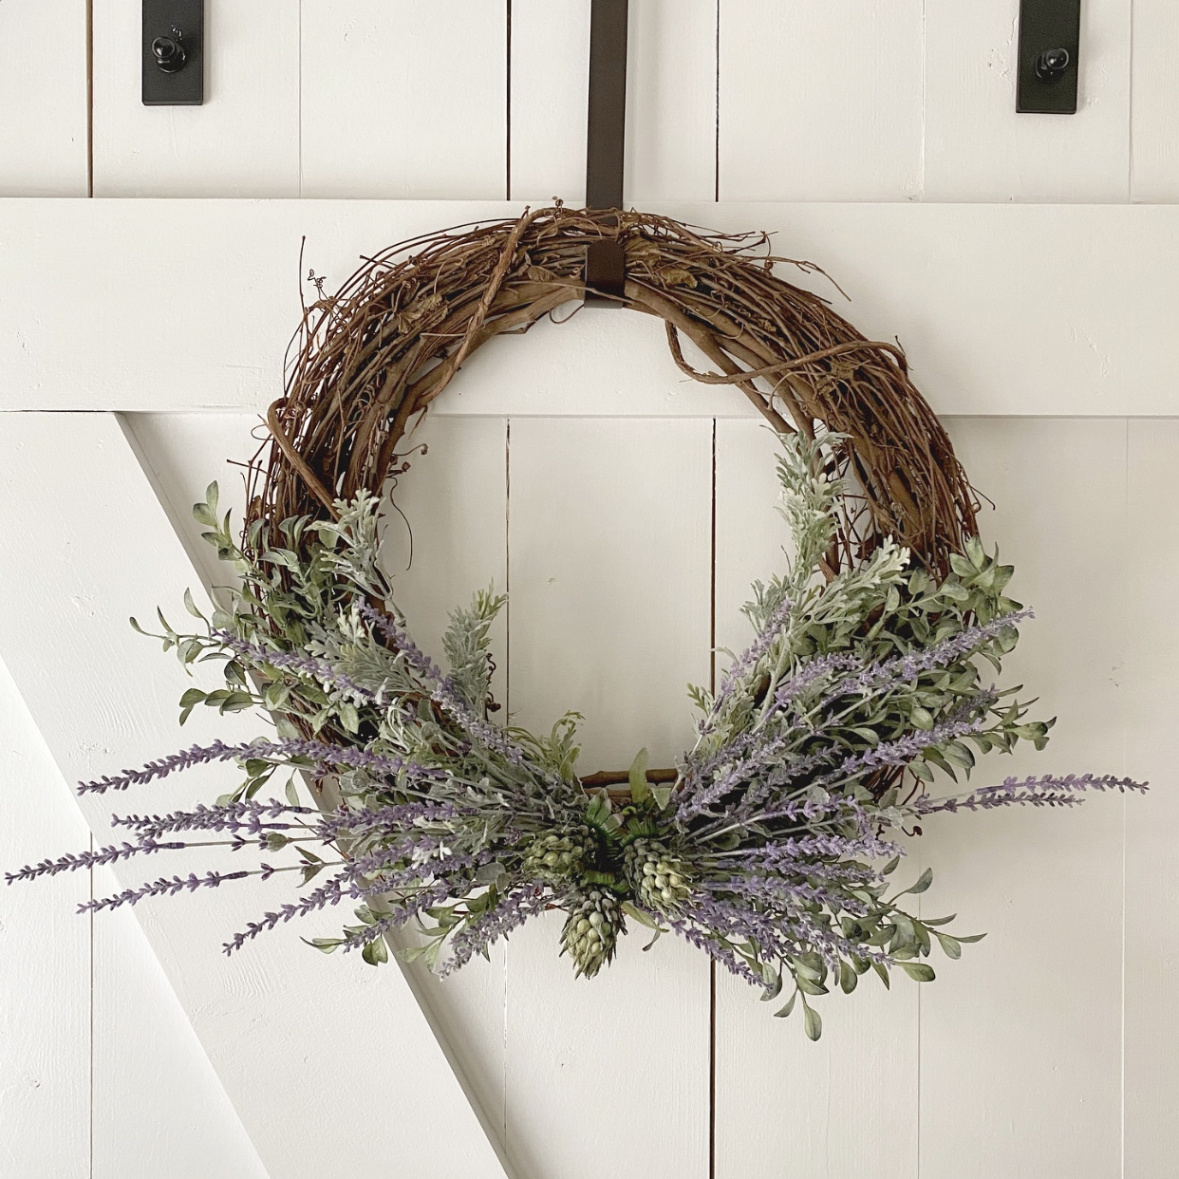 DIY French Country Inspired Lavender Wreath - Cali Girl In A